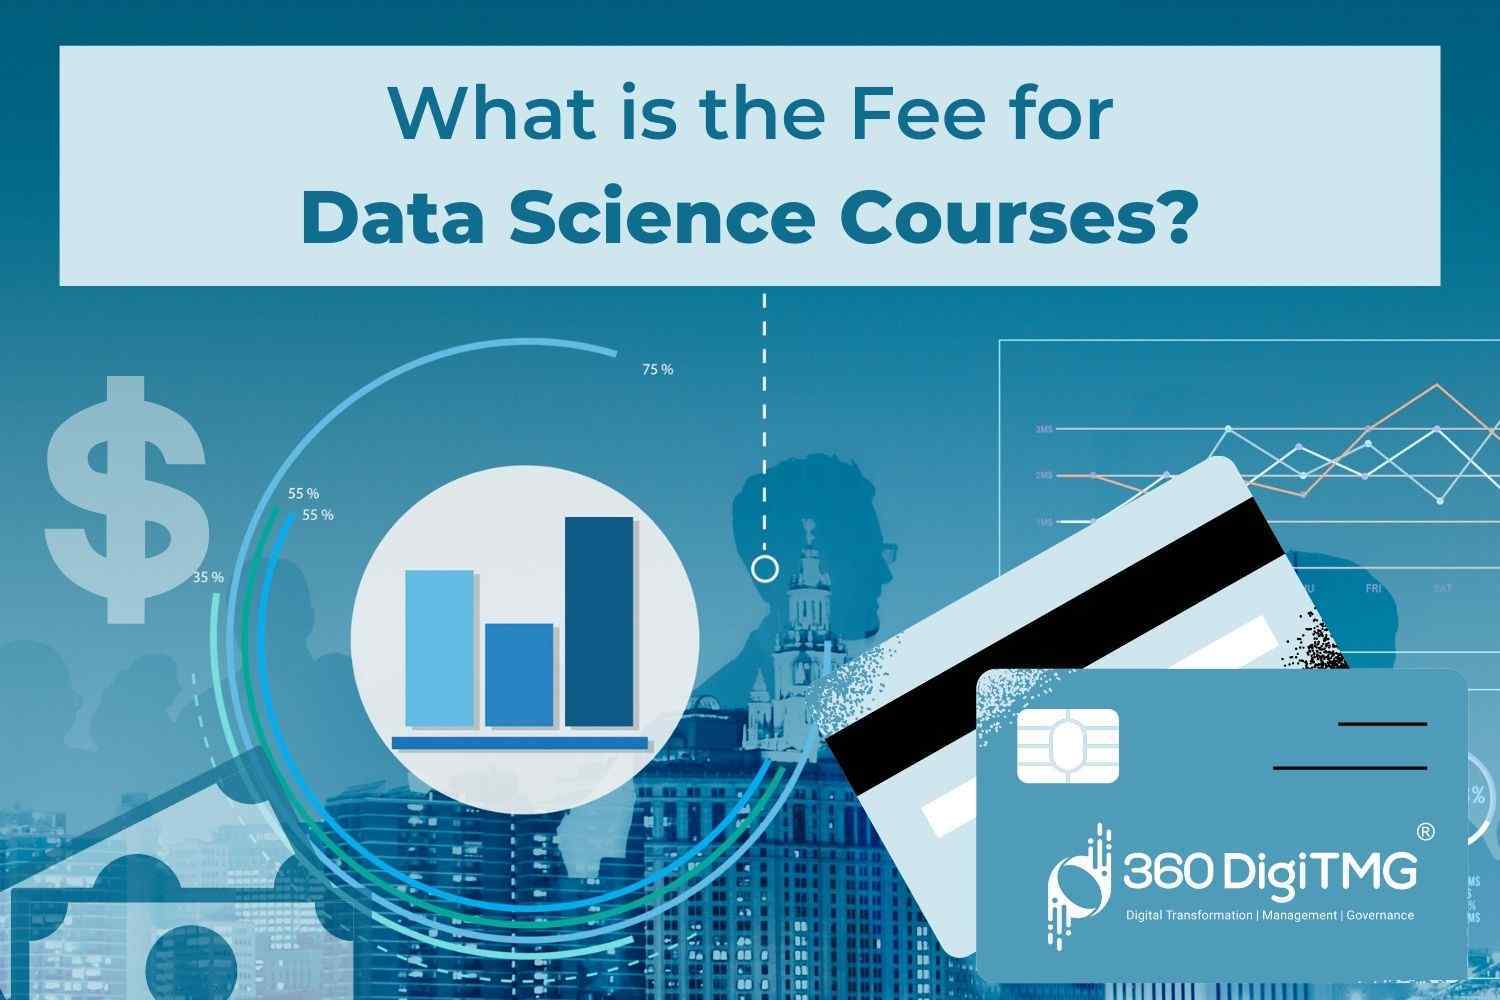 What is the Fee for Data Science Courses?